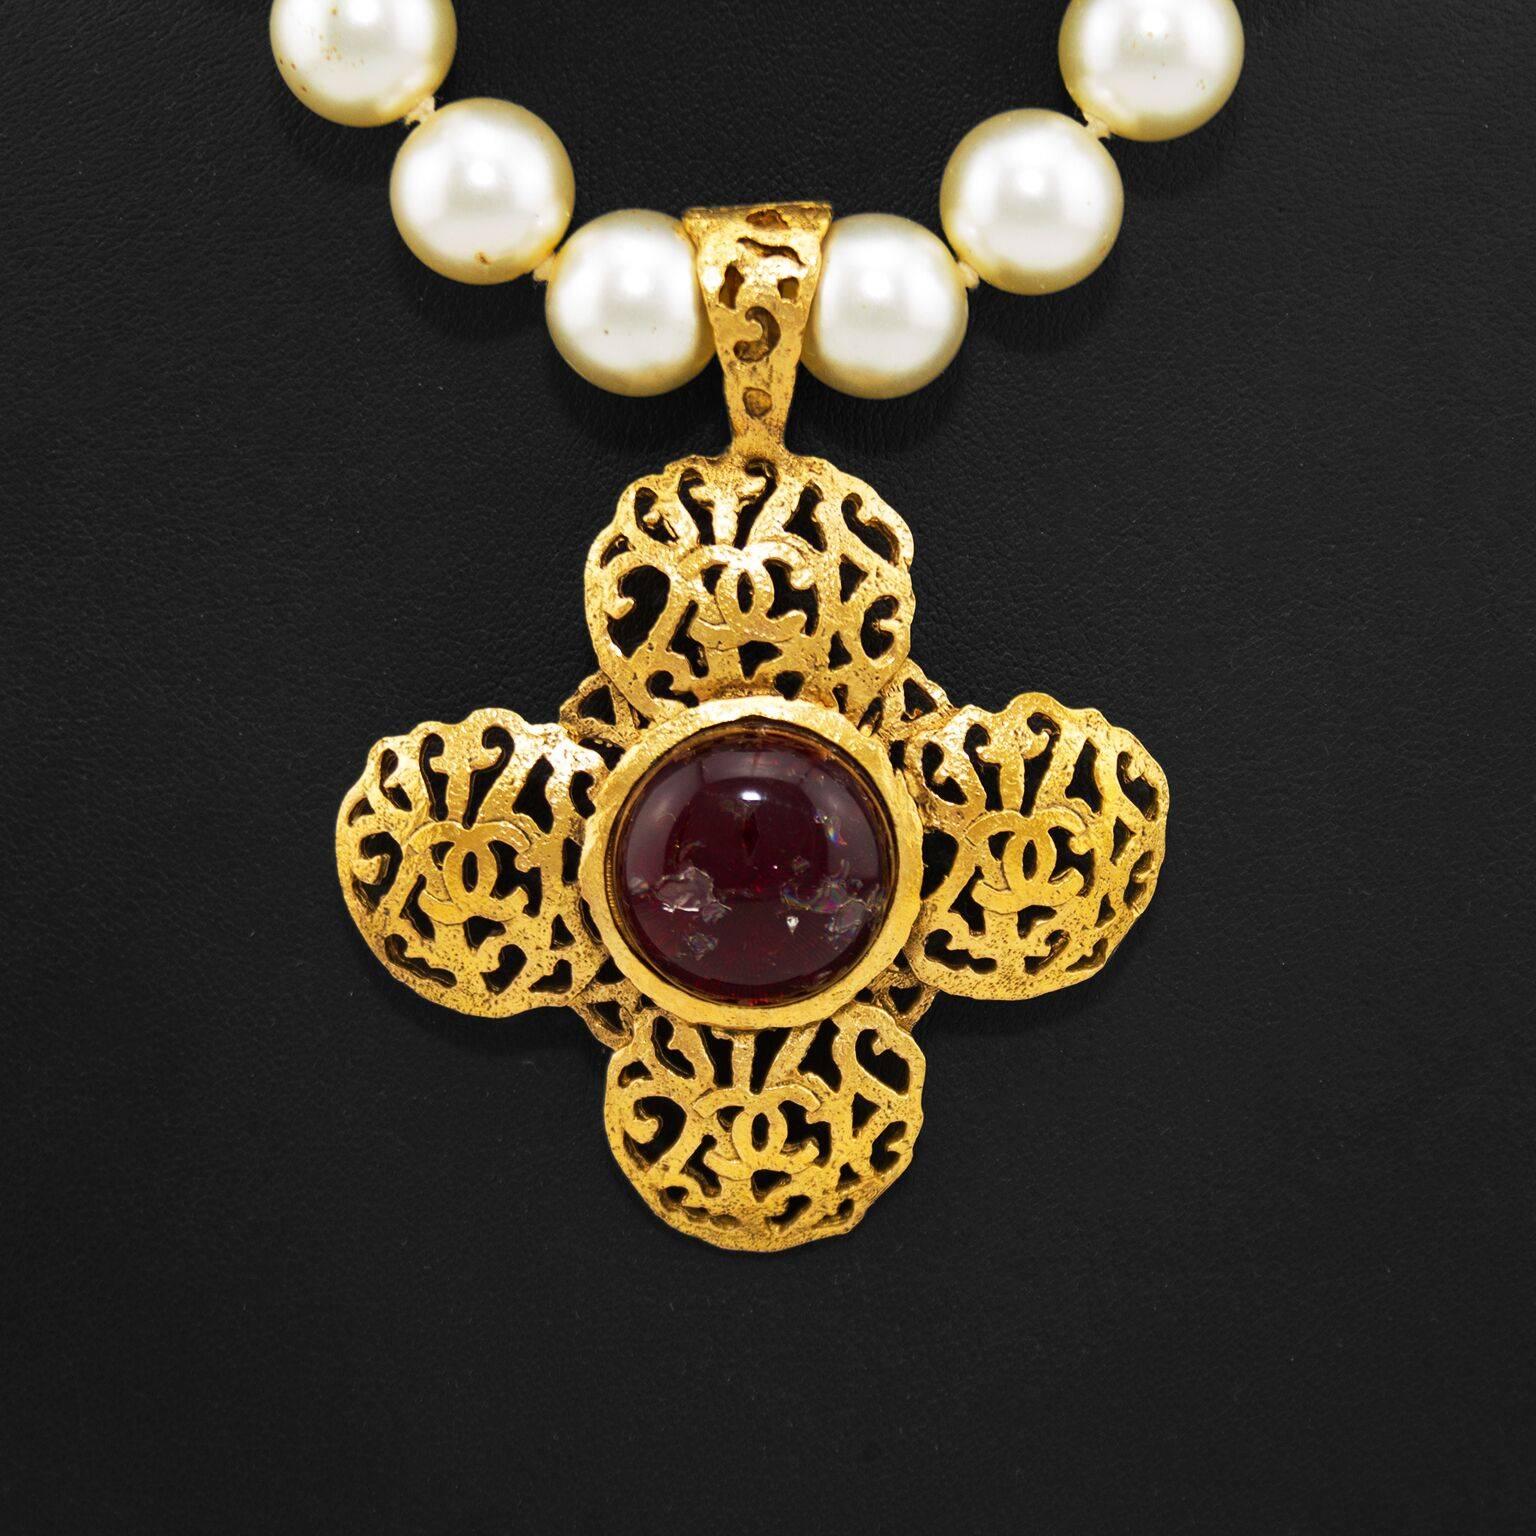 1970s Chanel faux pearl necklace with a large gold tone filagree pendant with CC logos added into the filagree design. Centre of the pendant is dark red crackle effect poured glass. Gold tone lobster clasp  and dangling CC logo at nape of neck. In